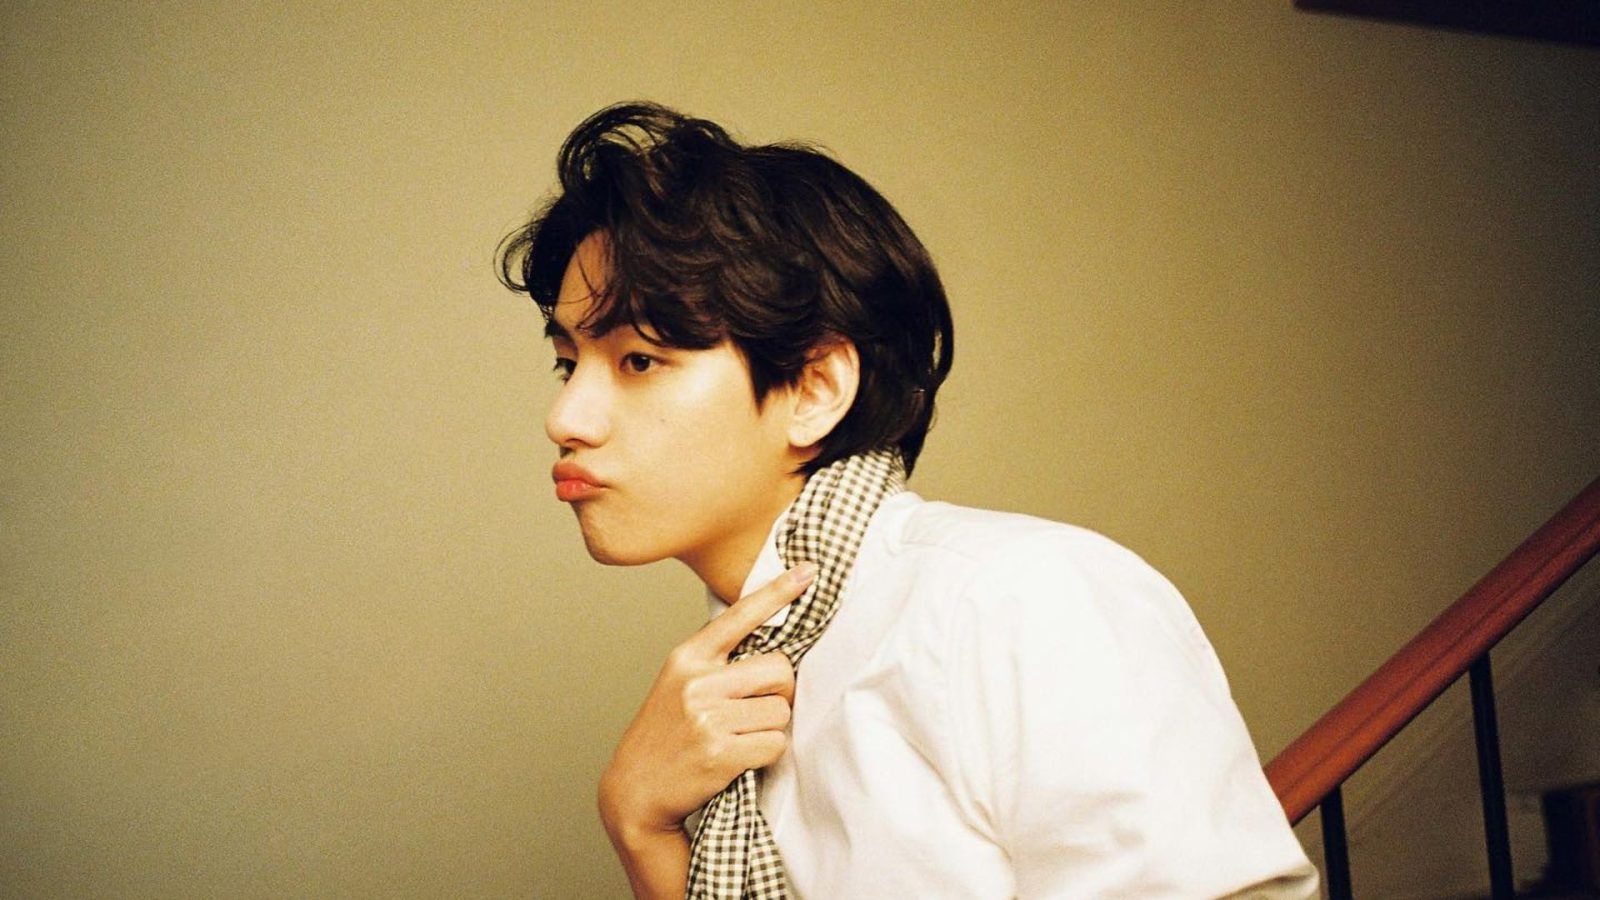 BTS' V becomes the first to garner 10 million likes on all Instagram posts